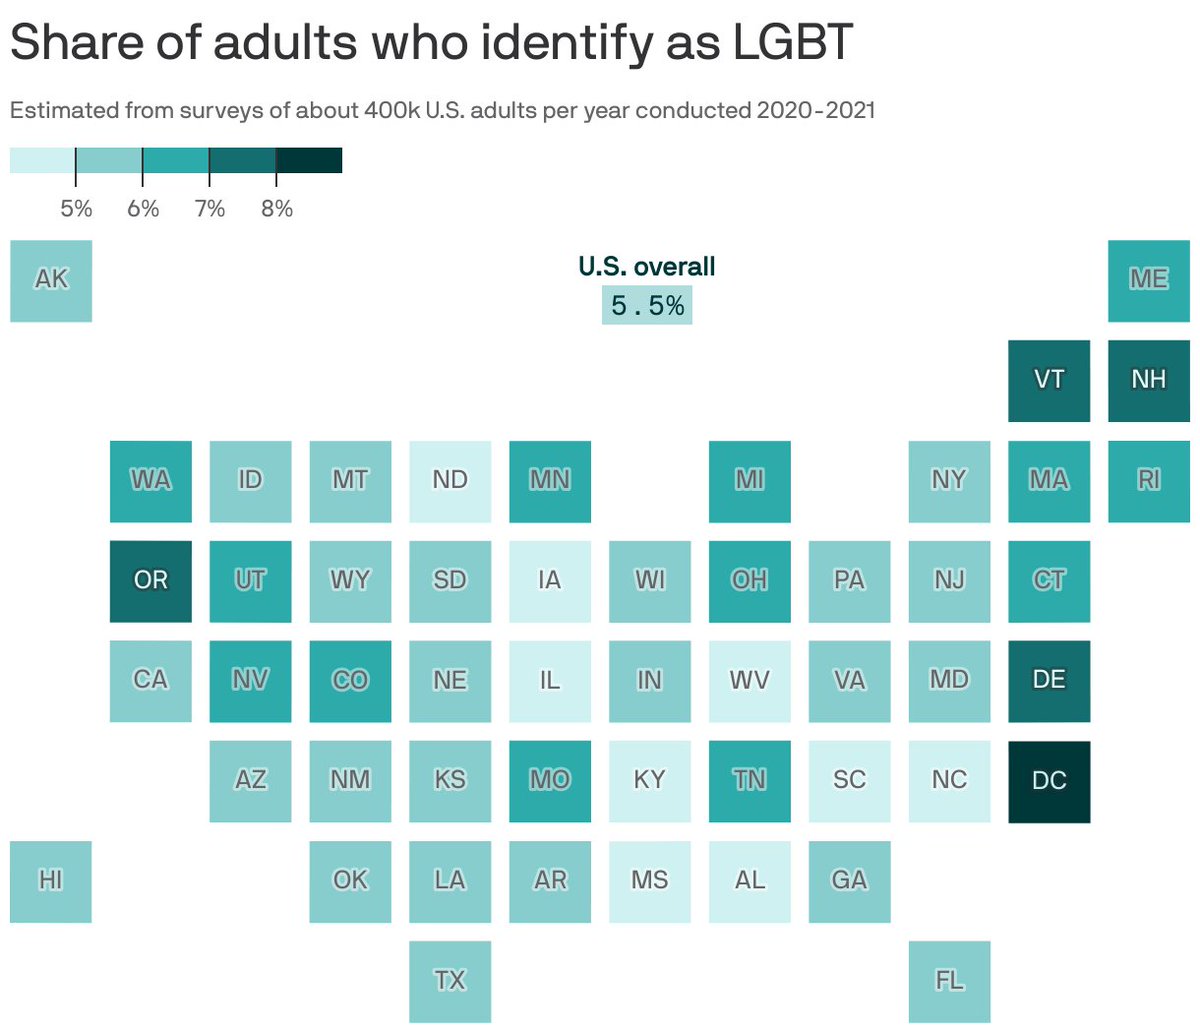 Washington, D.C., has the highest estimated share of adults identifying as LGBT among it and the 50 states, at 14.3%. trib.al/zVHse3f